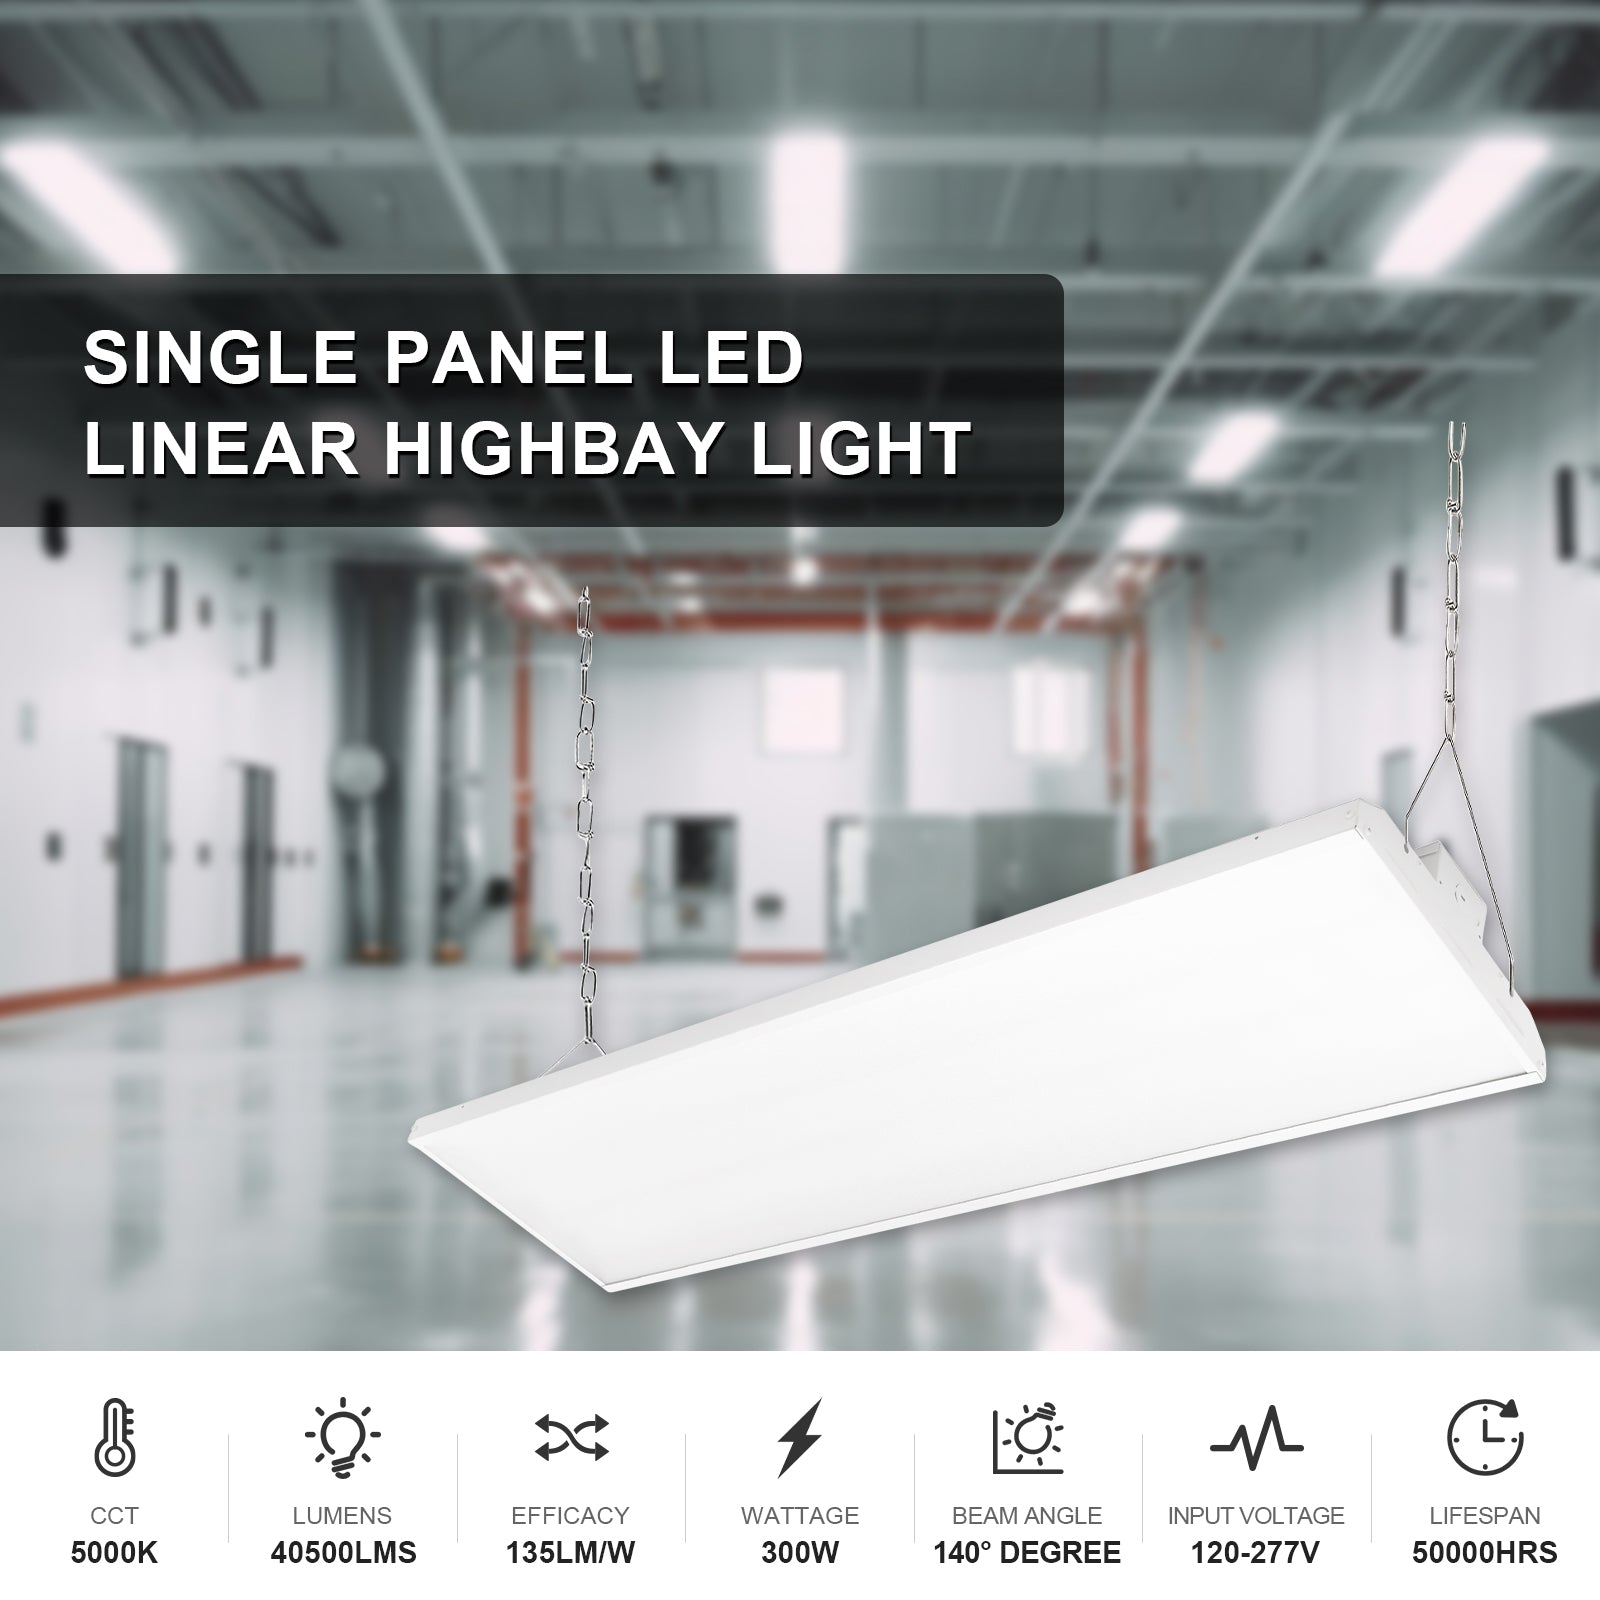 LED High Bay Lights are commercial/industrial light fixtures designed for spaces with 20-foot ceilings or higher. 